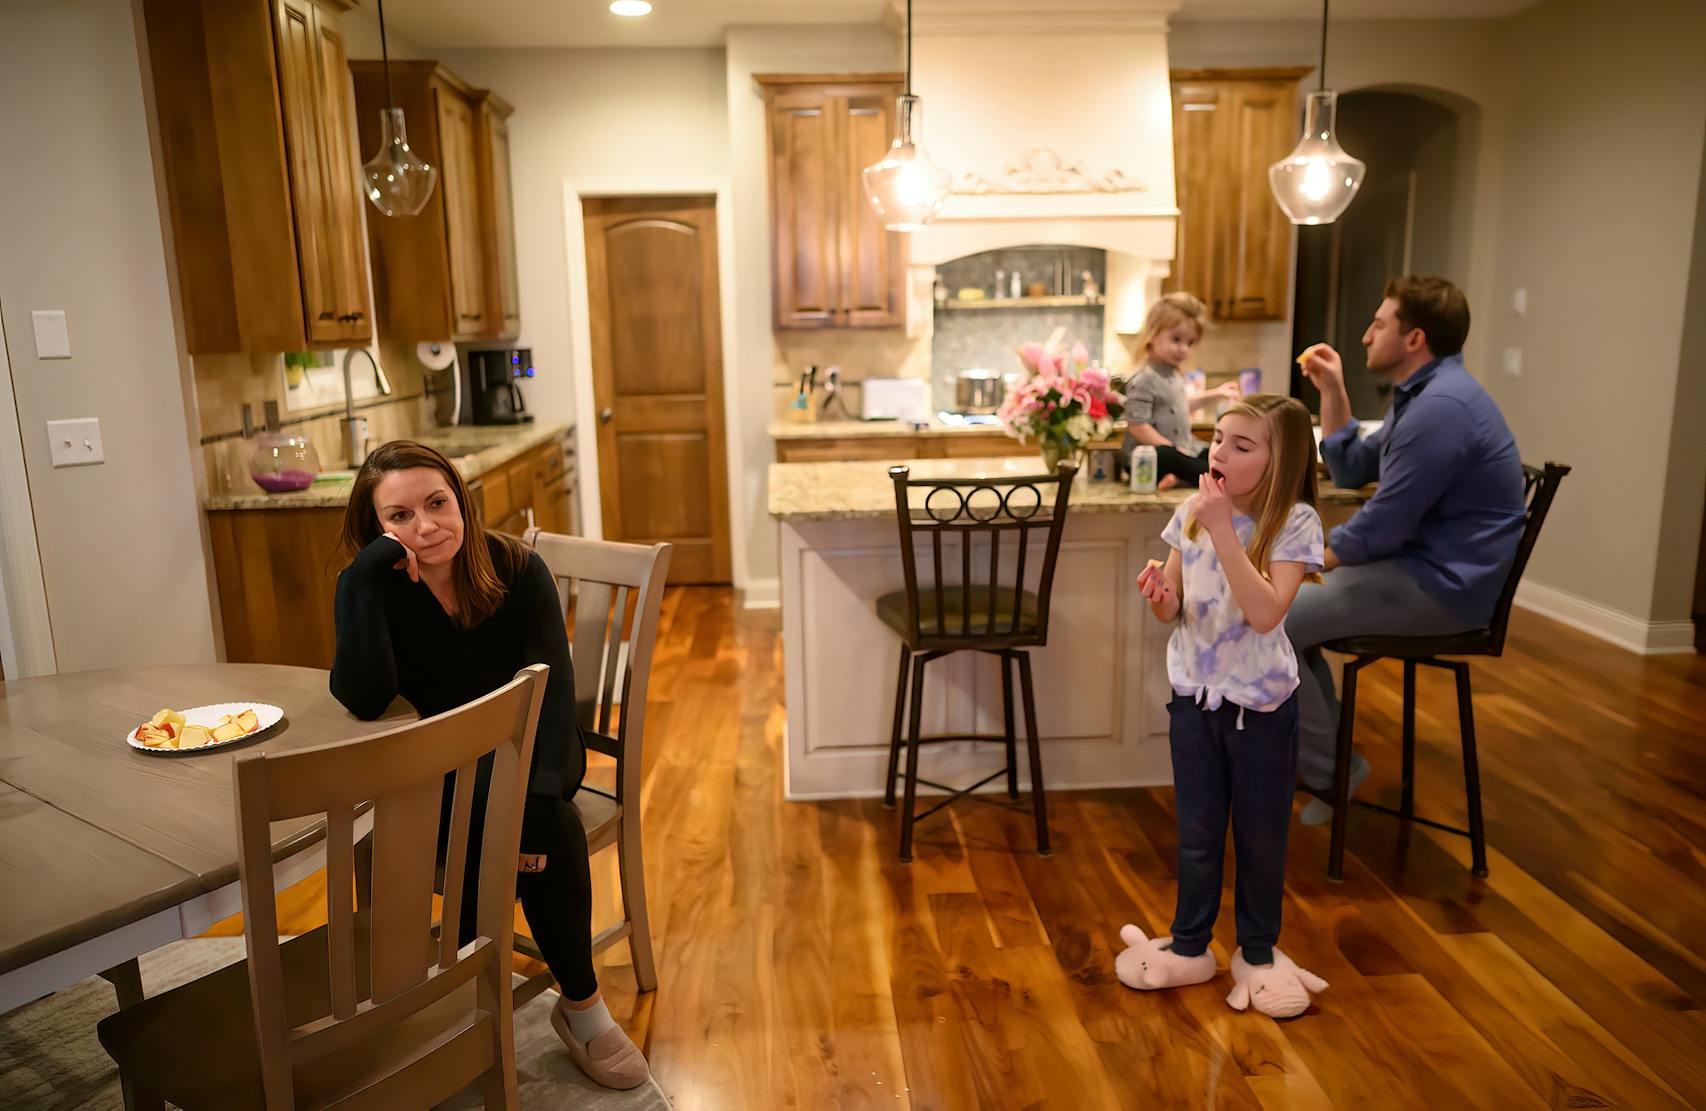 Holly Vilione looked on as her daughters Nora, 2, Mya, 8 and husband, Chris Vilione, snacked in the kitchen a few hours after Holly returned from another difficult day working in the ICU.